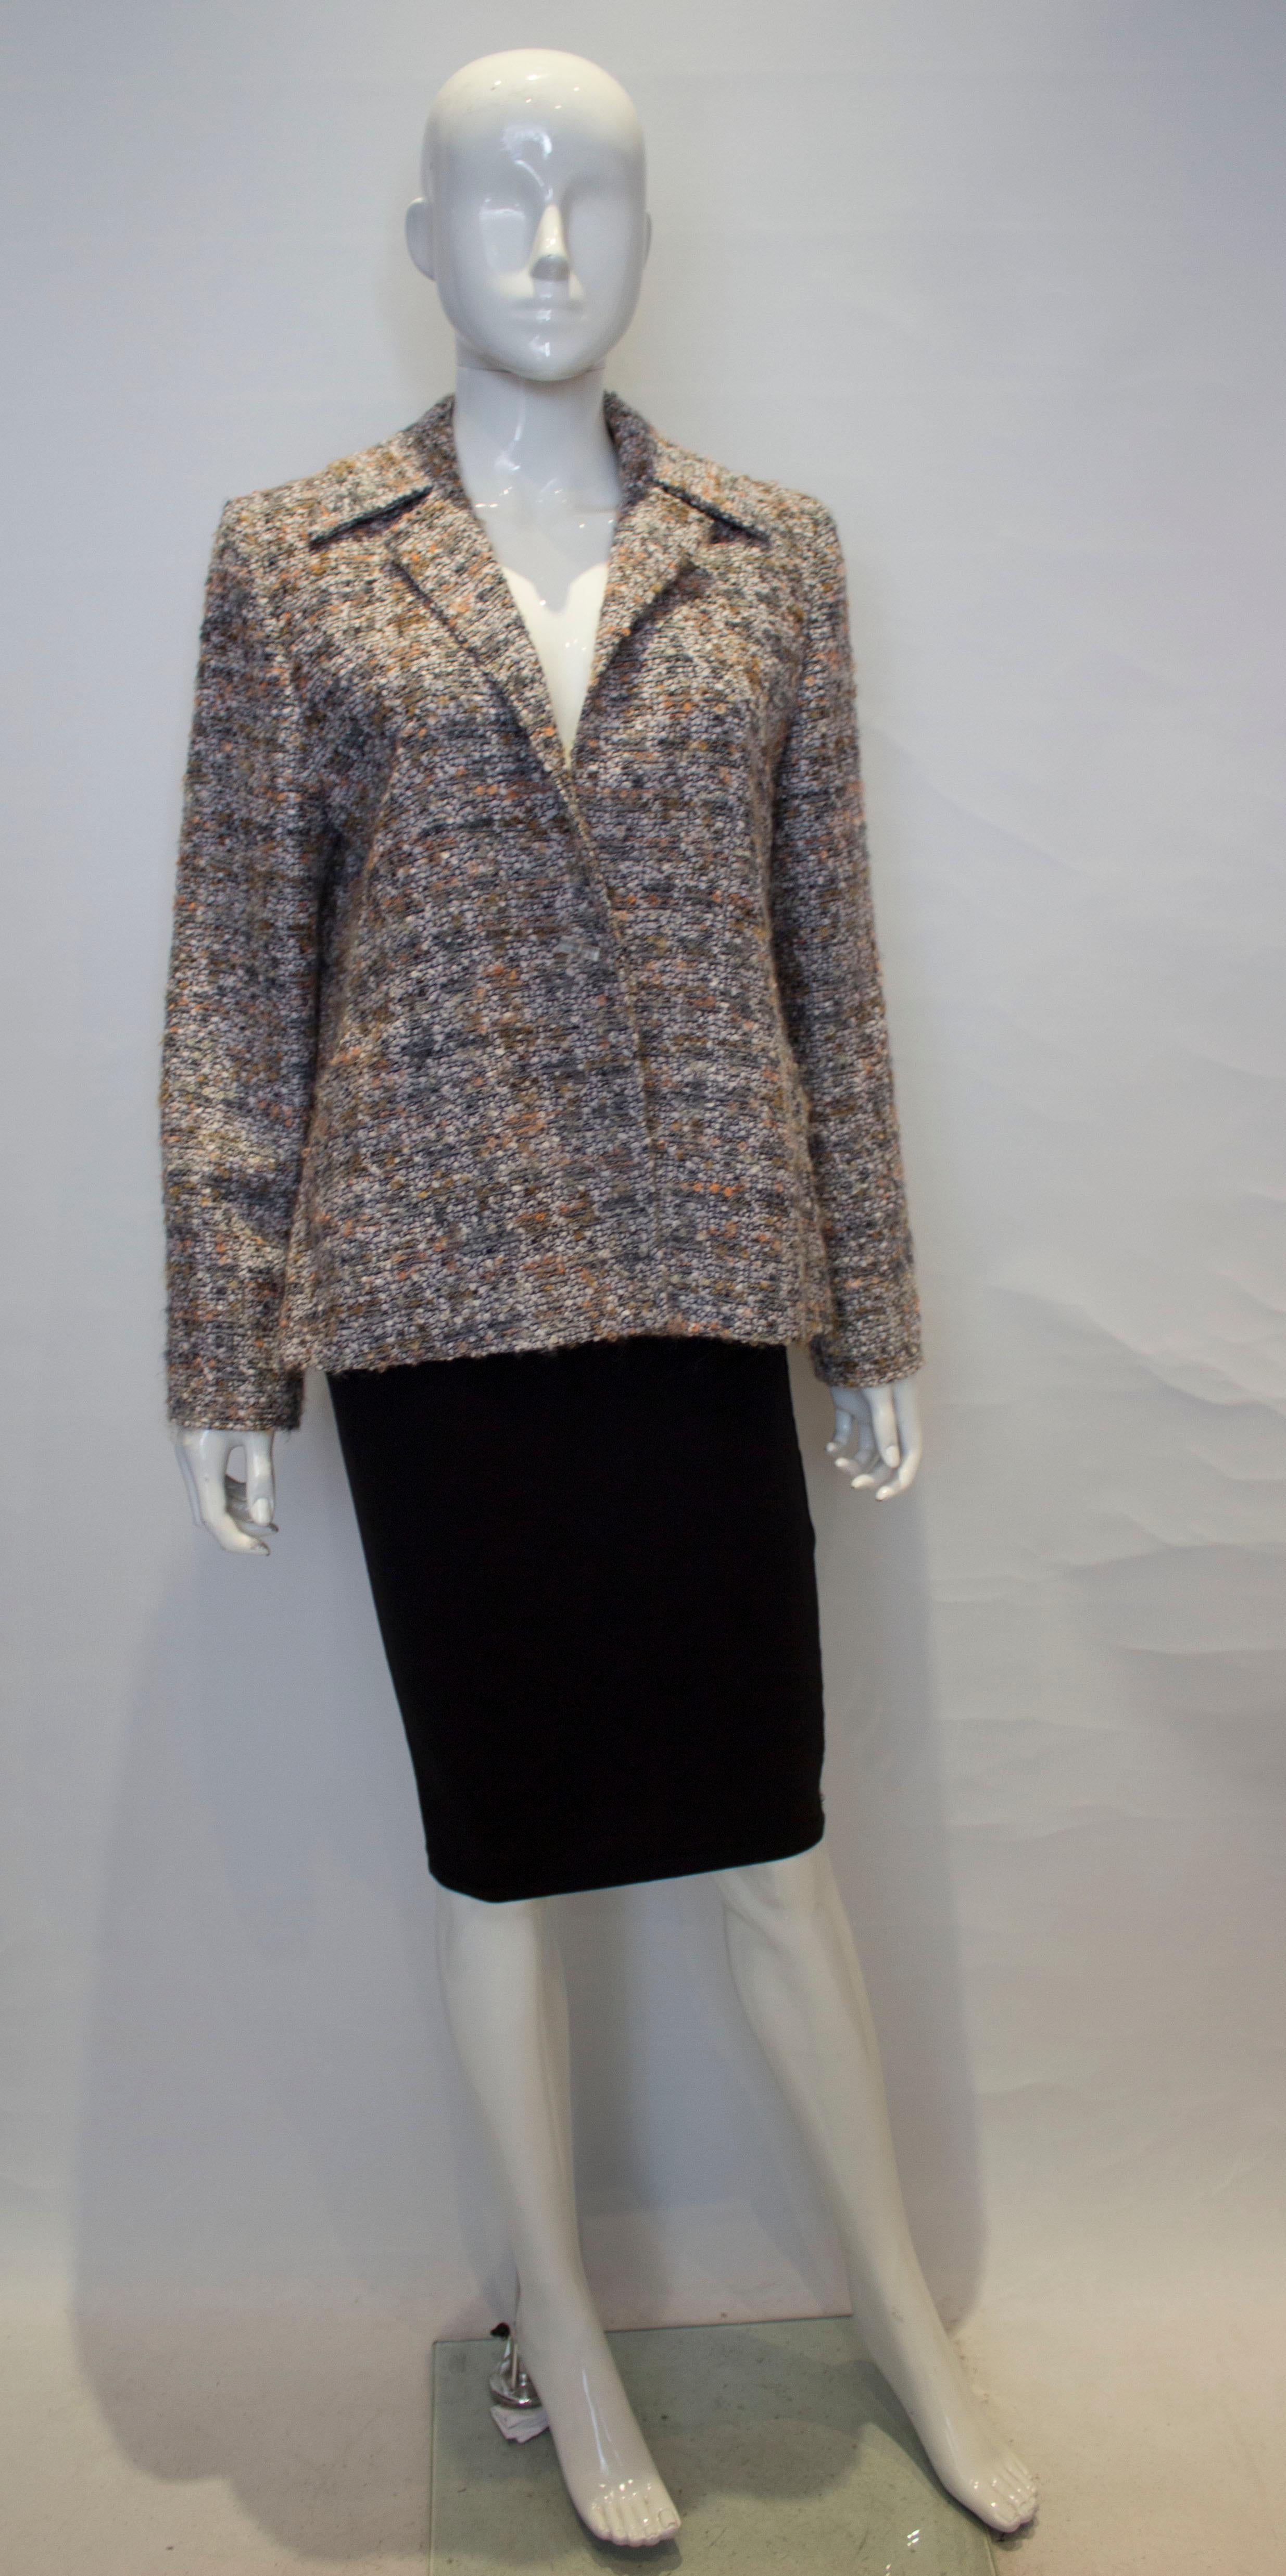 A great jacket for Fall by Jean Myuir, main line. The jacket is in a pretty mix of colours, grey, peach and ivory. It has a cut away collar, is fully lined and has two front pockets.